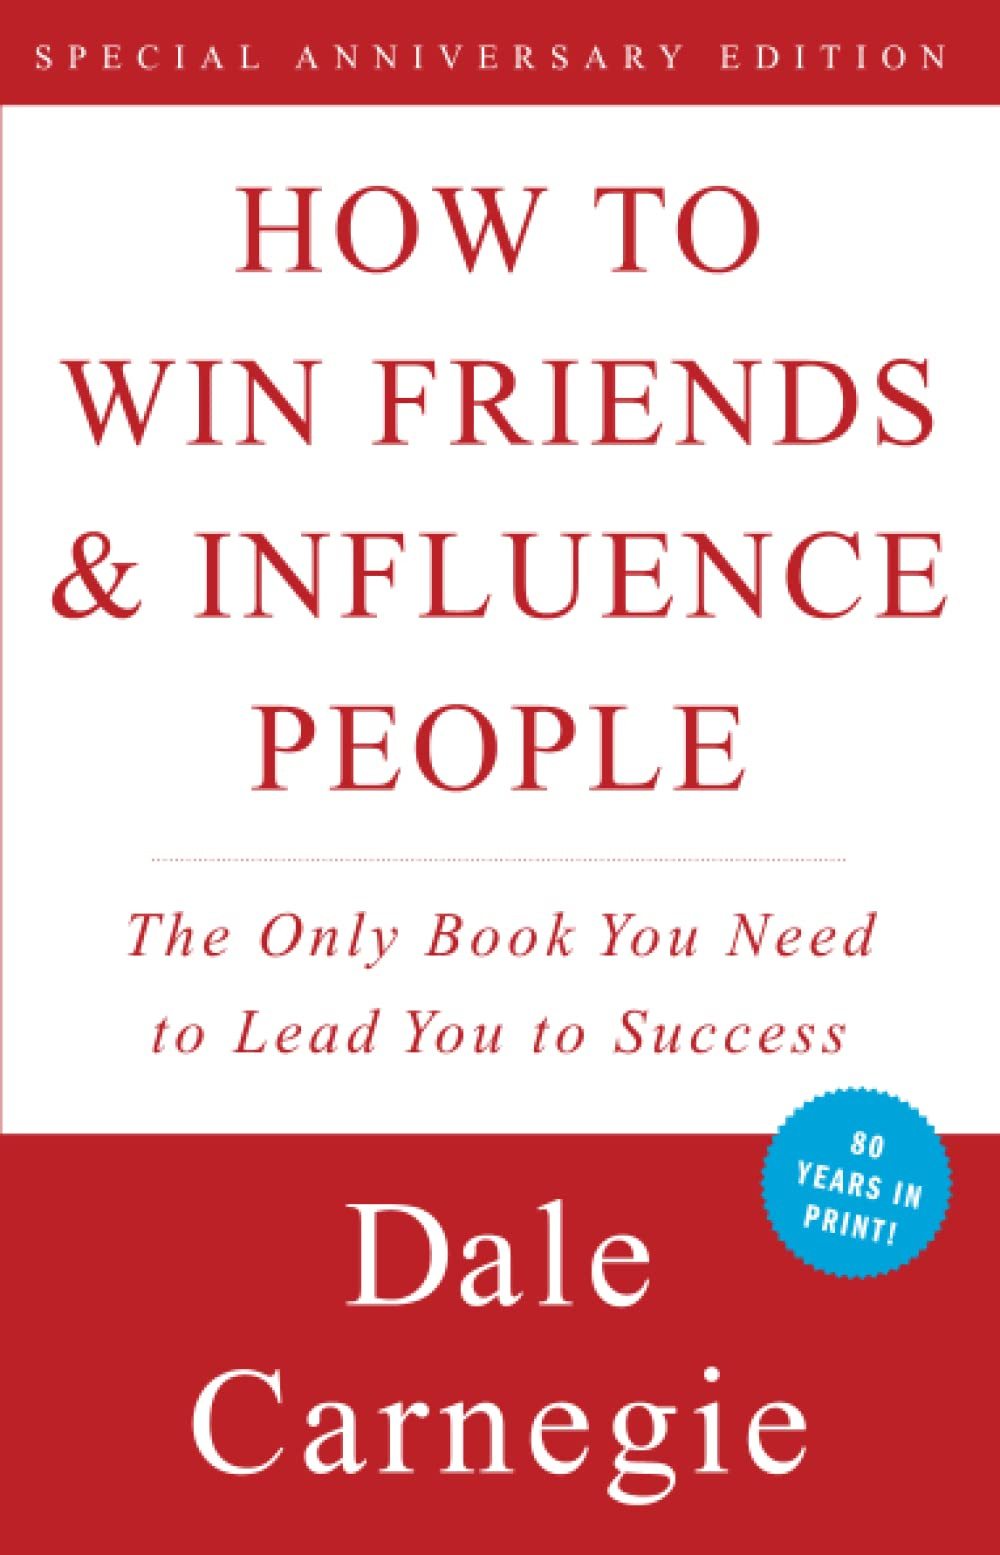 How to Win Friends and Influence People: Carnegie, Dale: 8937485909400:  Books - Amazon.ca